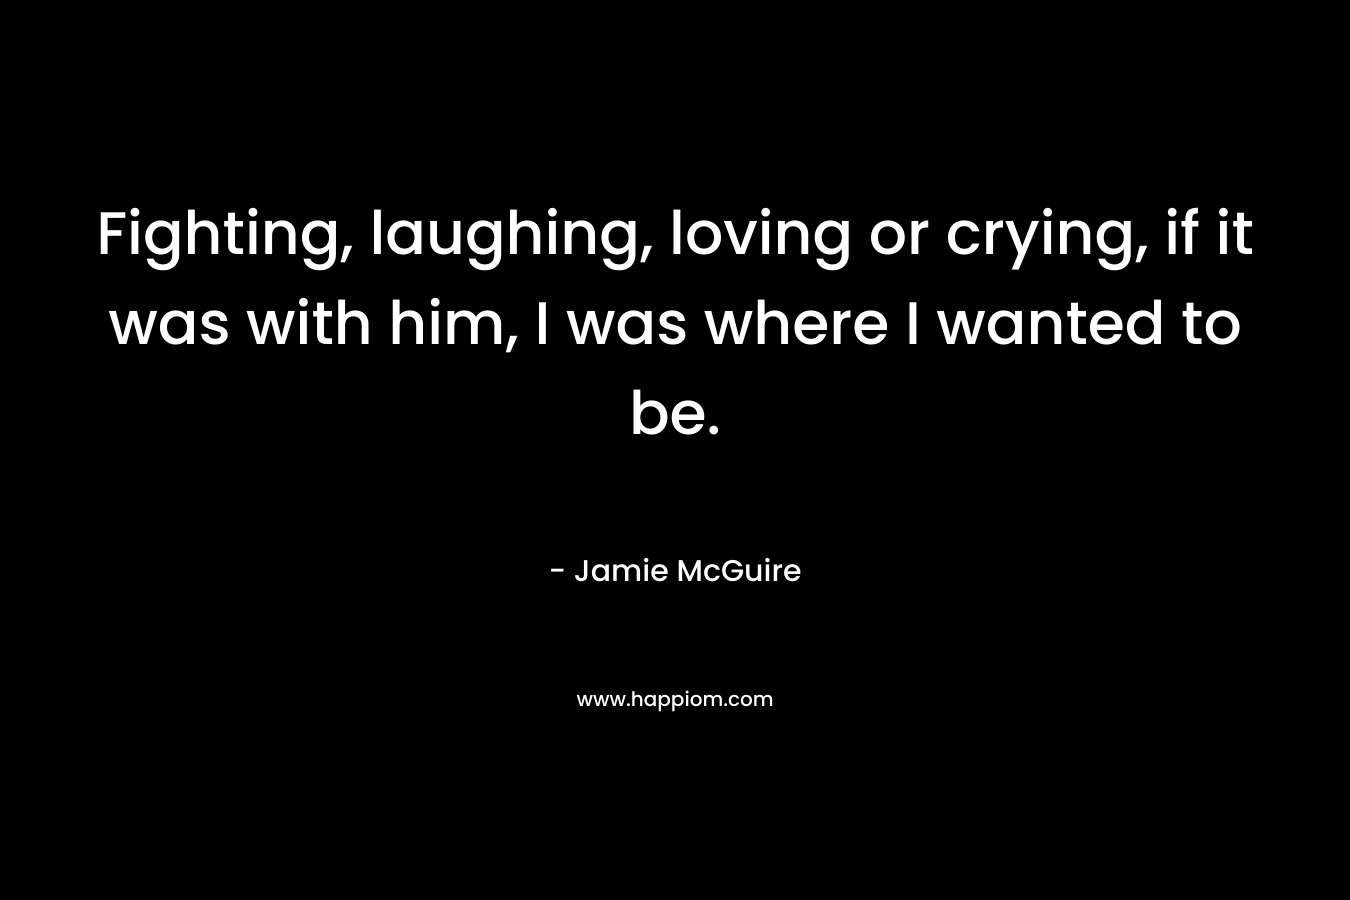 Fighting, laughing, loving or crying, if it was with him, I was where I wanted to be. – Jamie McGuire